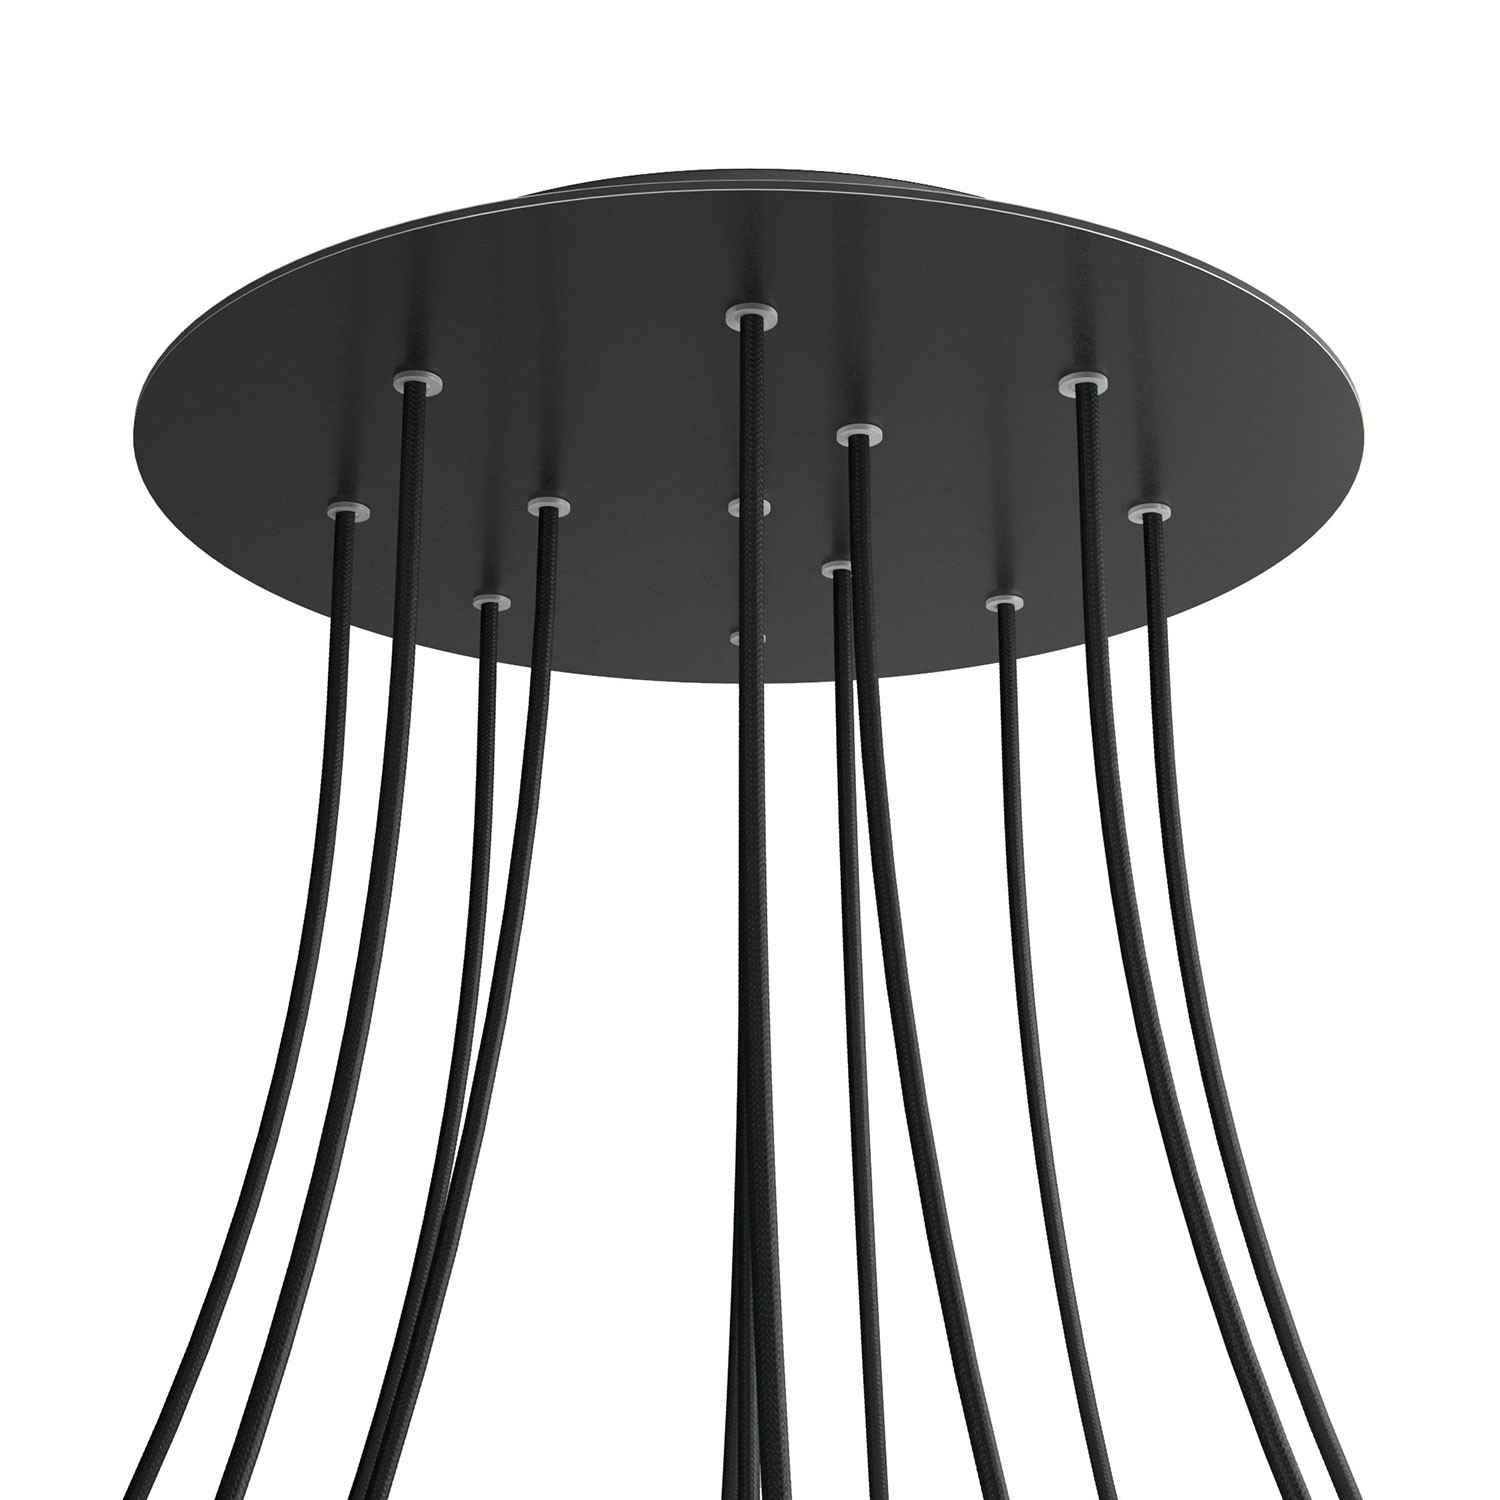 12 Holes - EXTRA LARGE Round Ceiling Canopy Kit - Rose One System